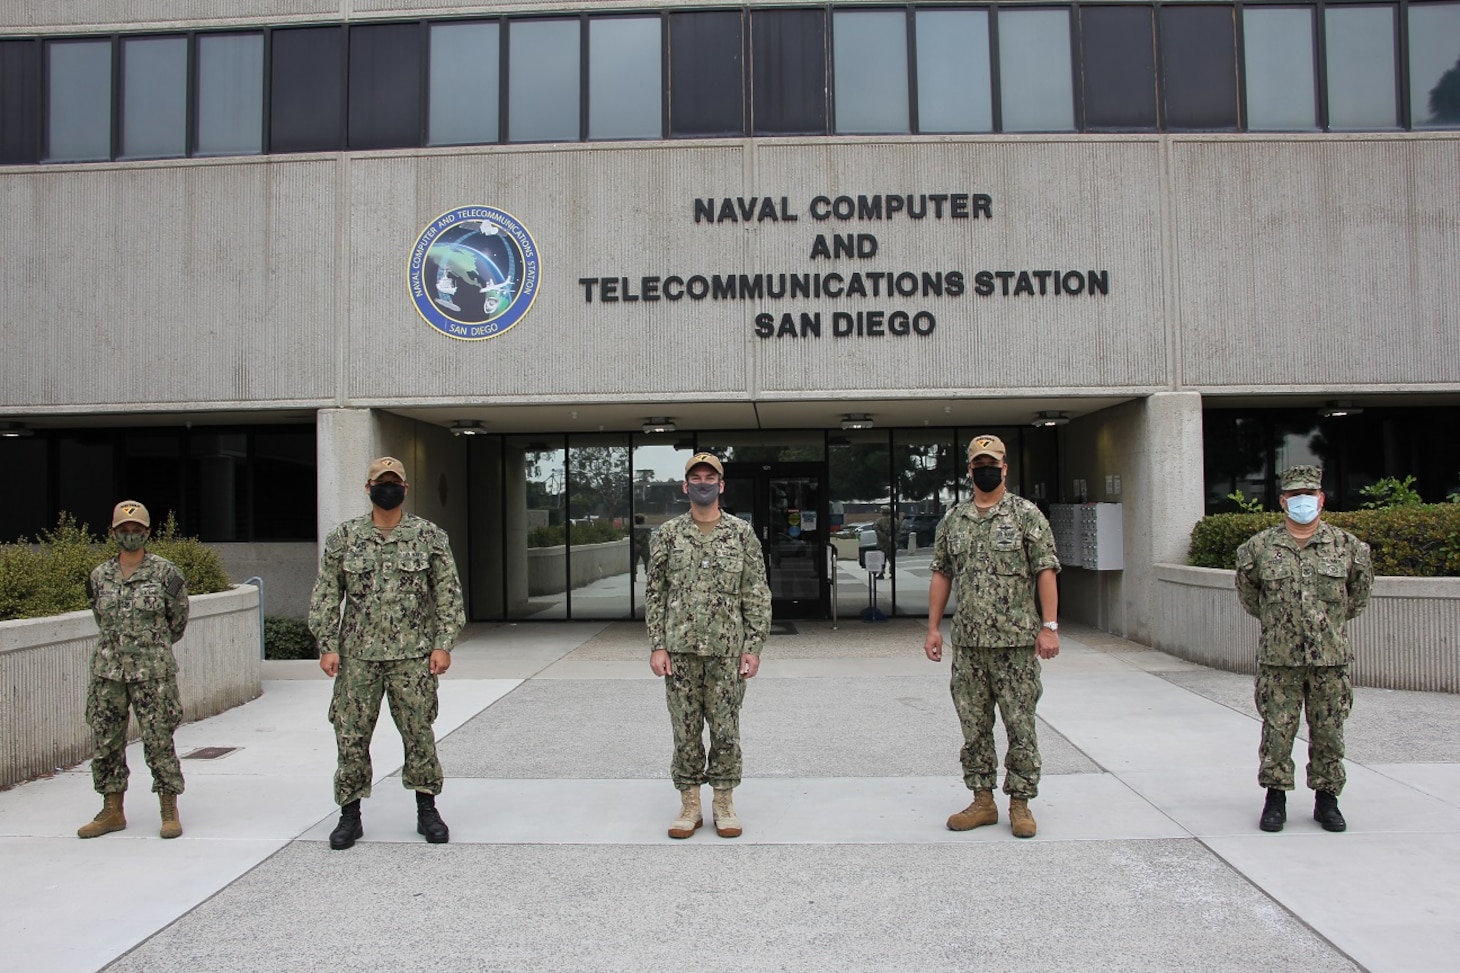 Members of the Naval Information Warfare Systems Command Reserve Program pose for a photo after conducting a site survey.